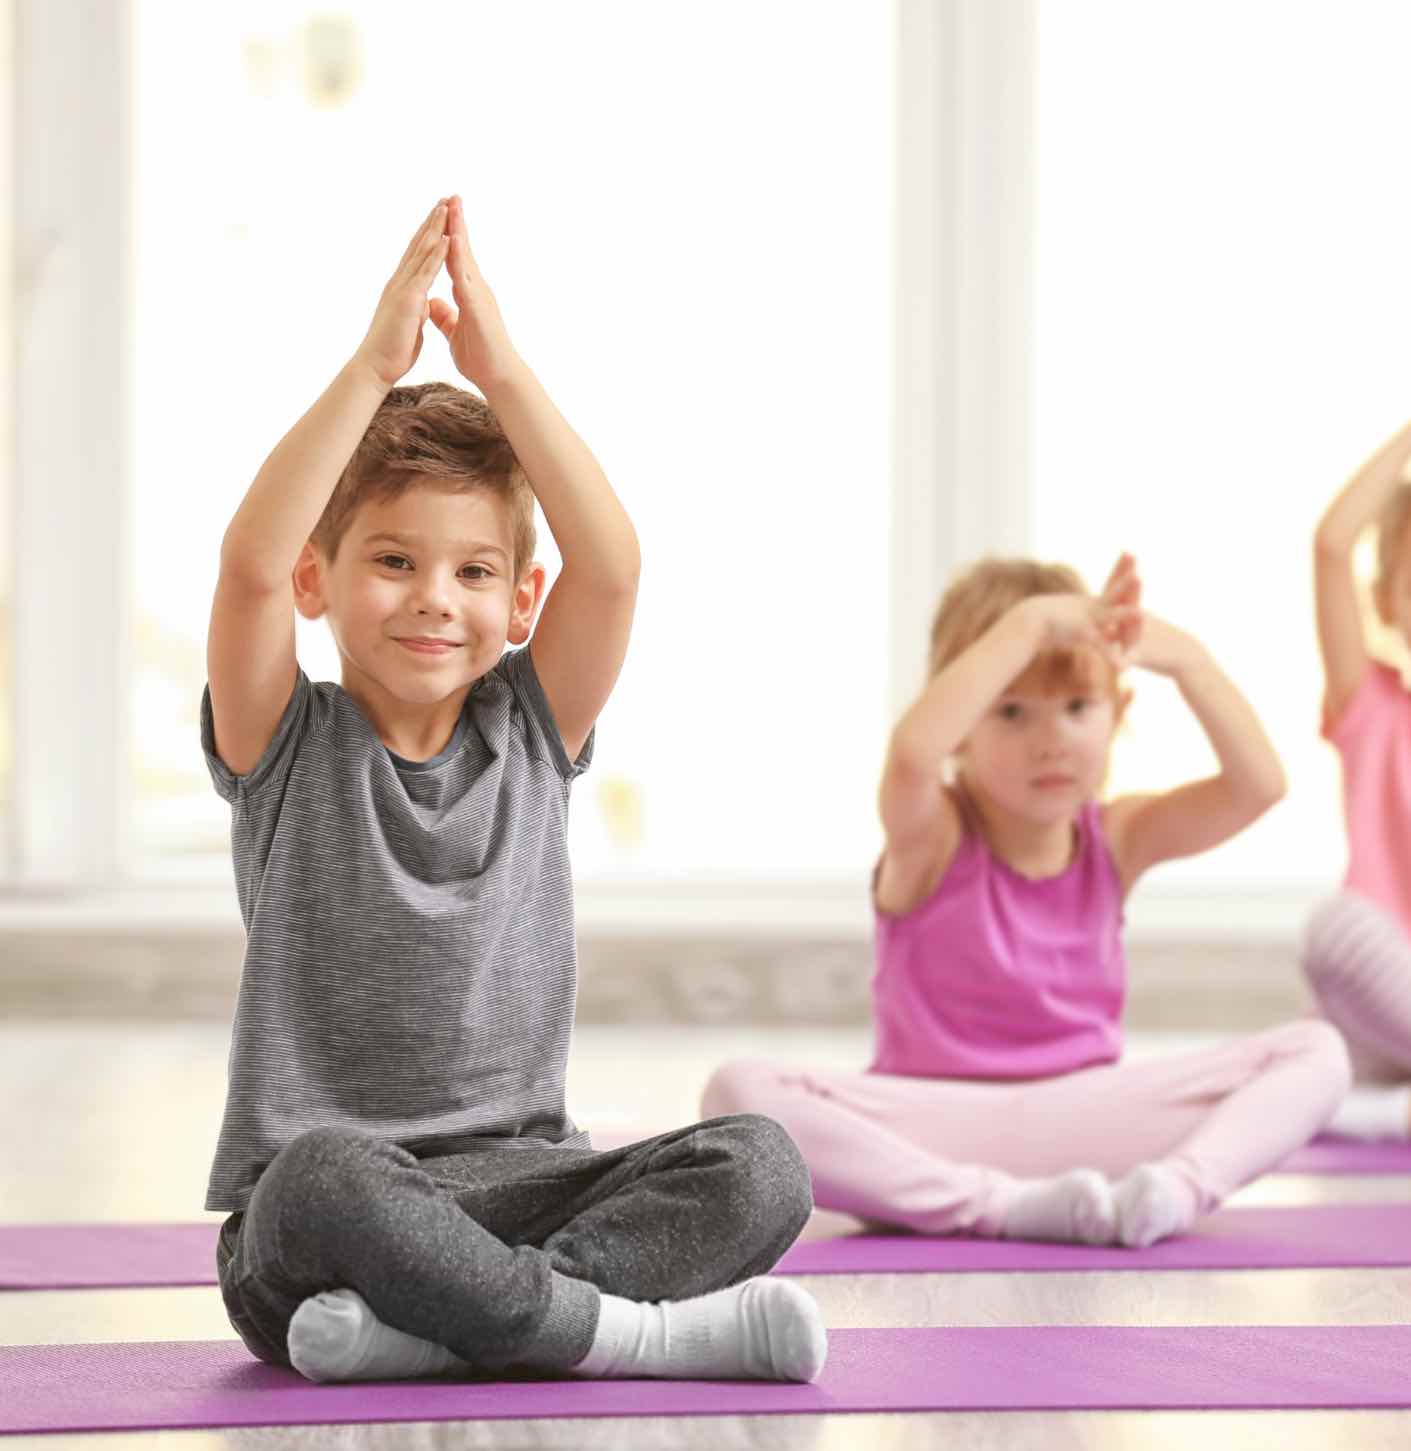 These kids enjoy practicing mindfulness through yoga - learn more tips with Romp n' Roll St. Petersburg!